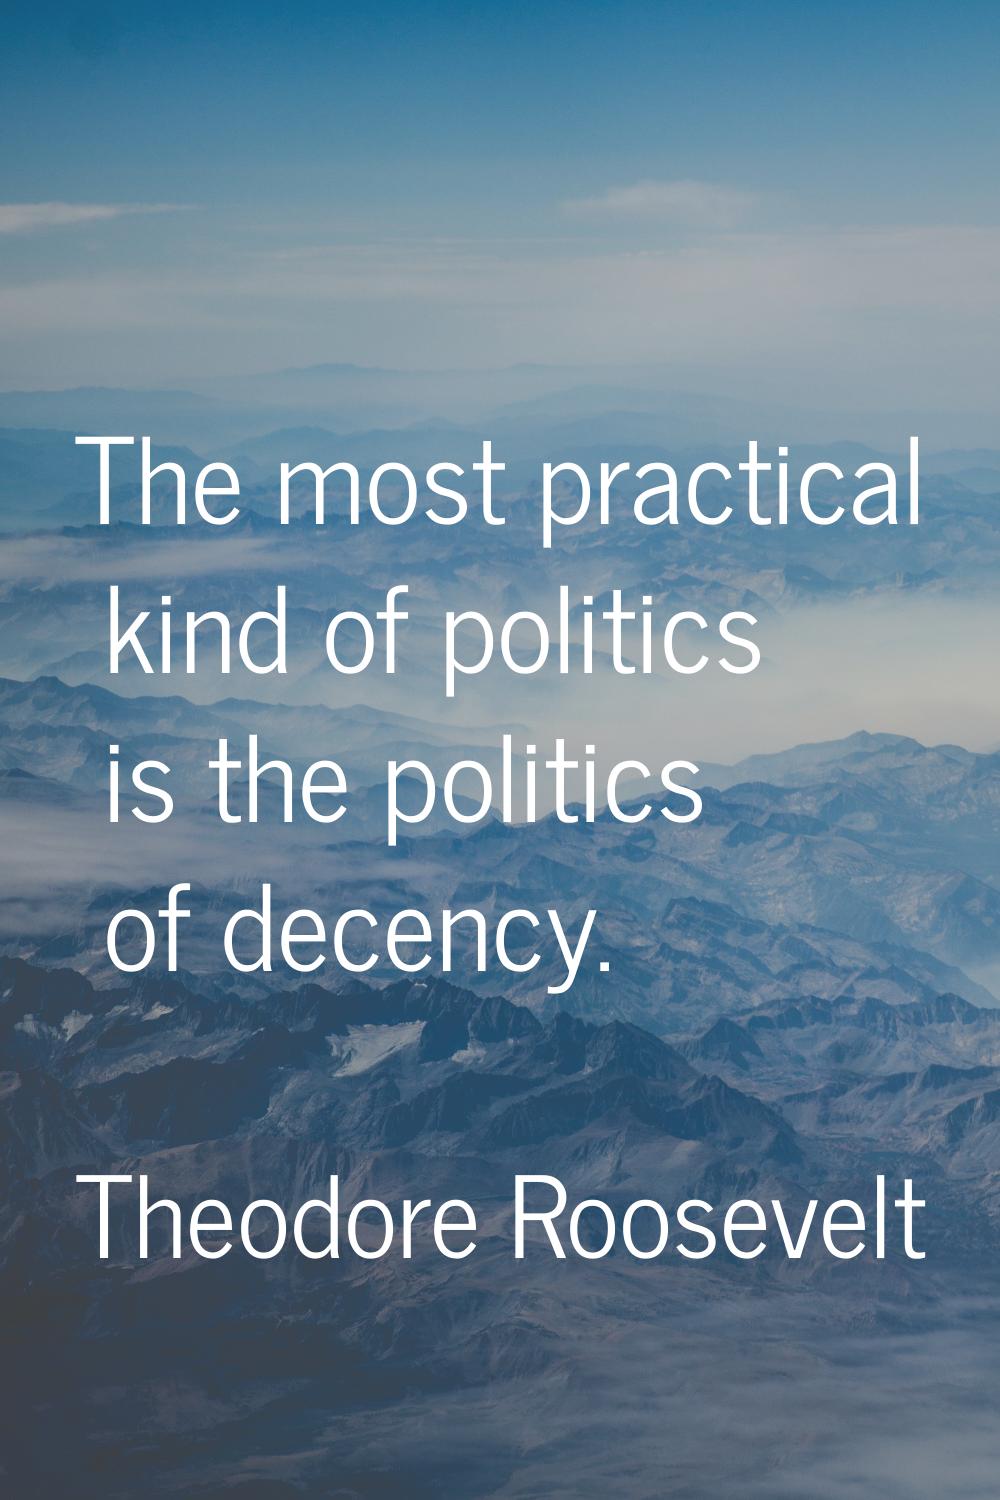 The most practical kind of politics is the politics of decency.